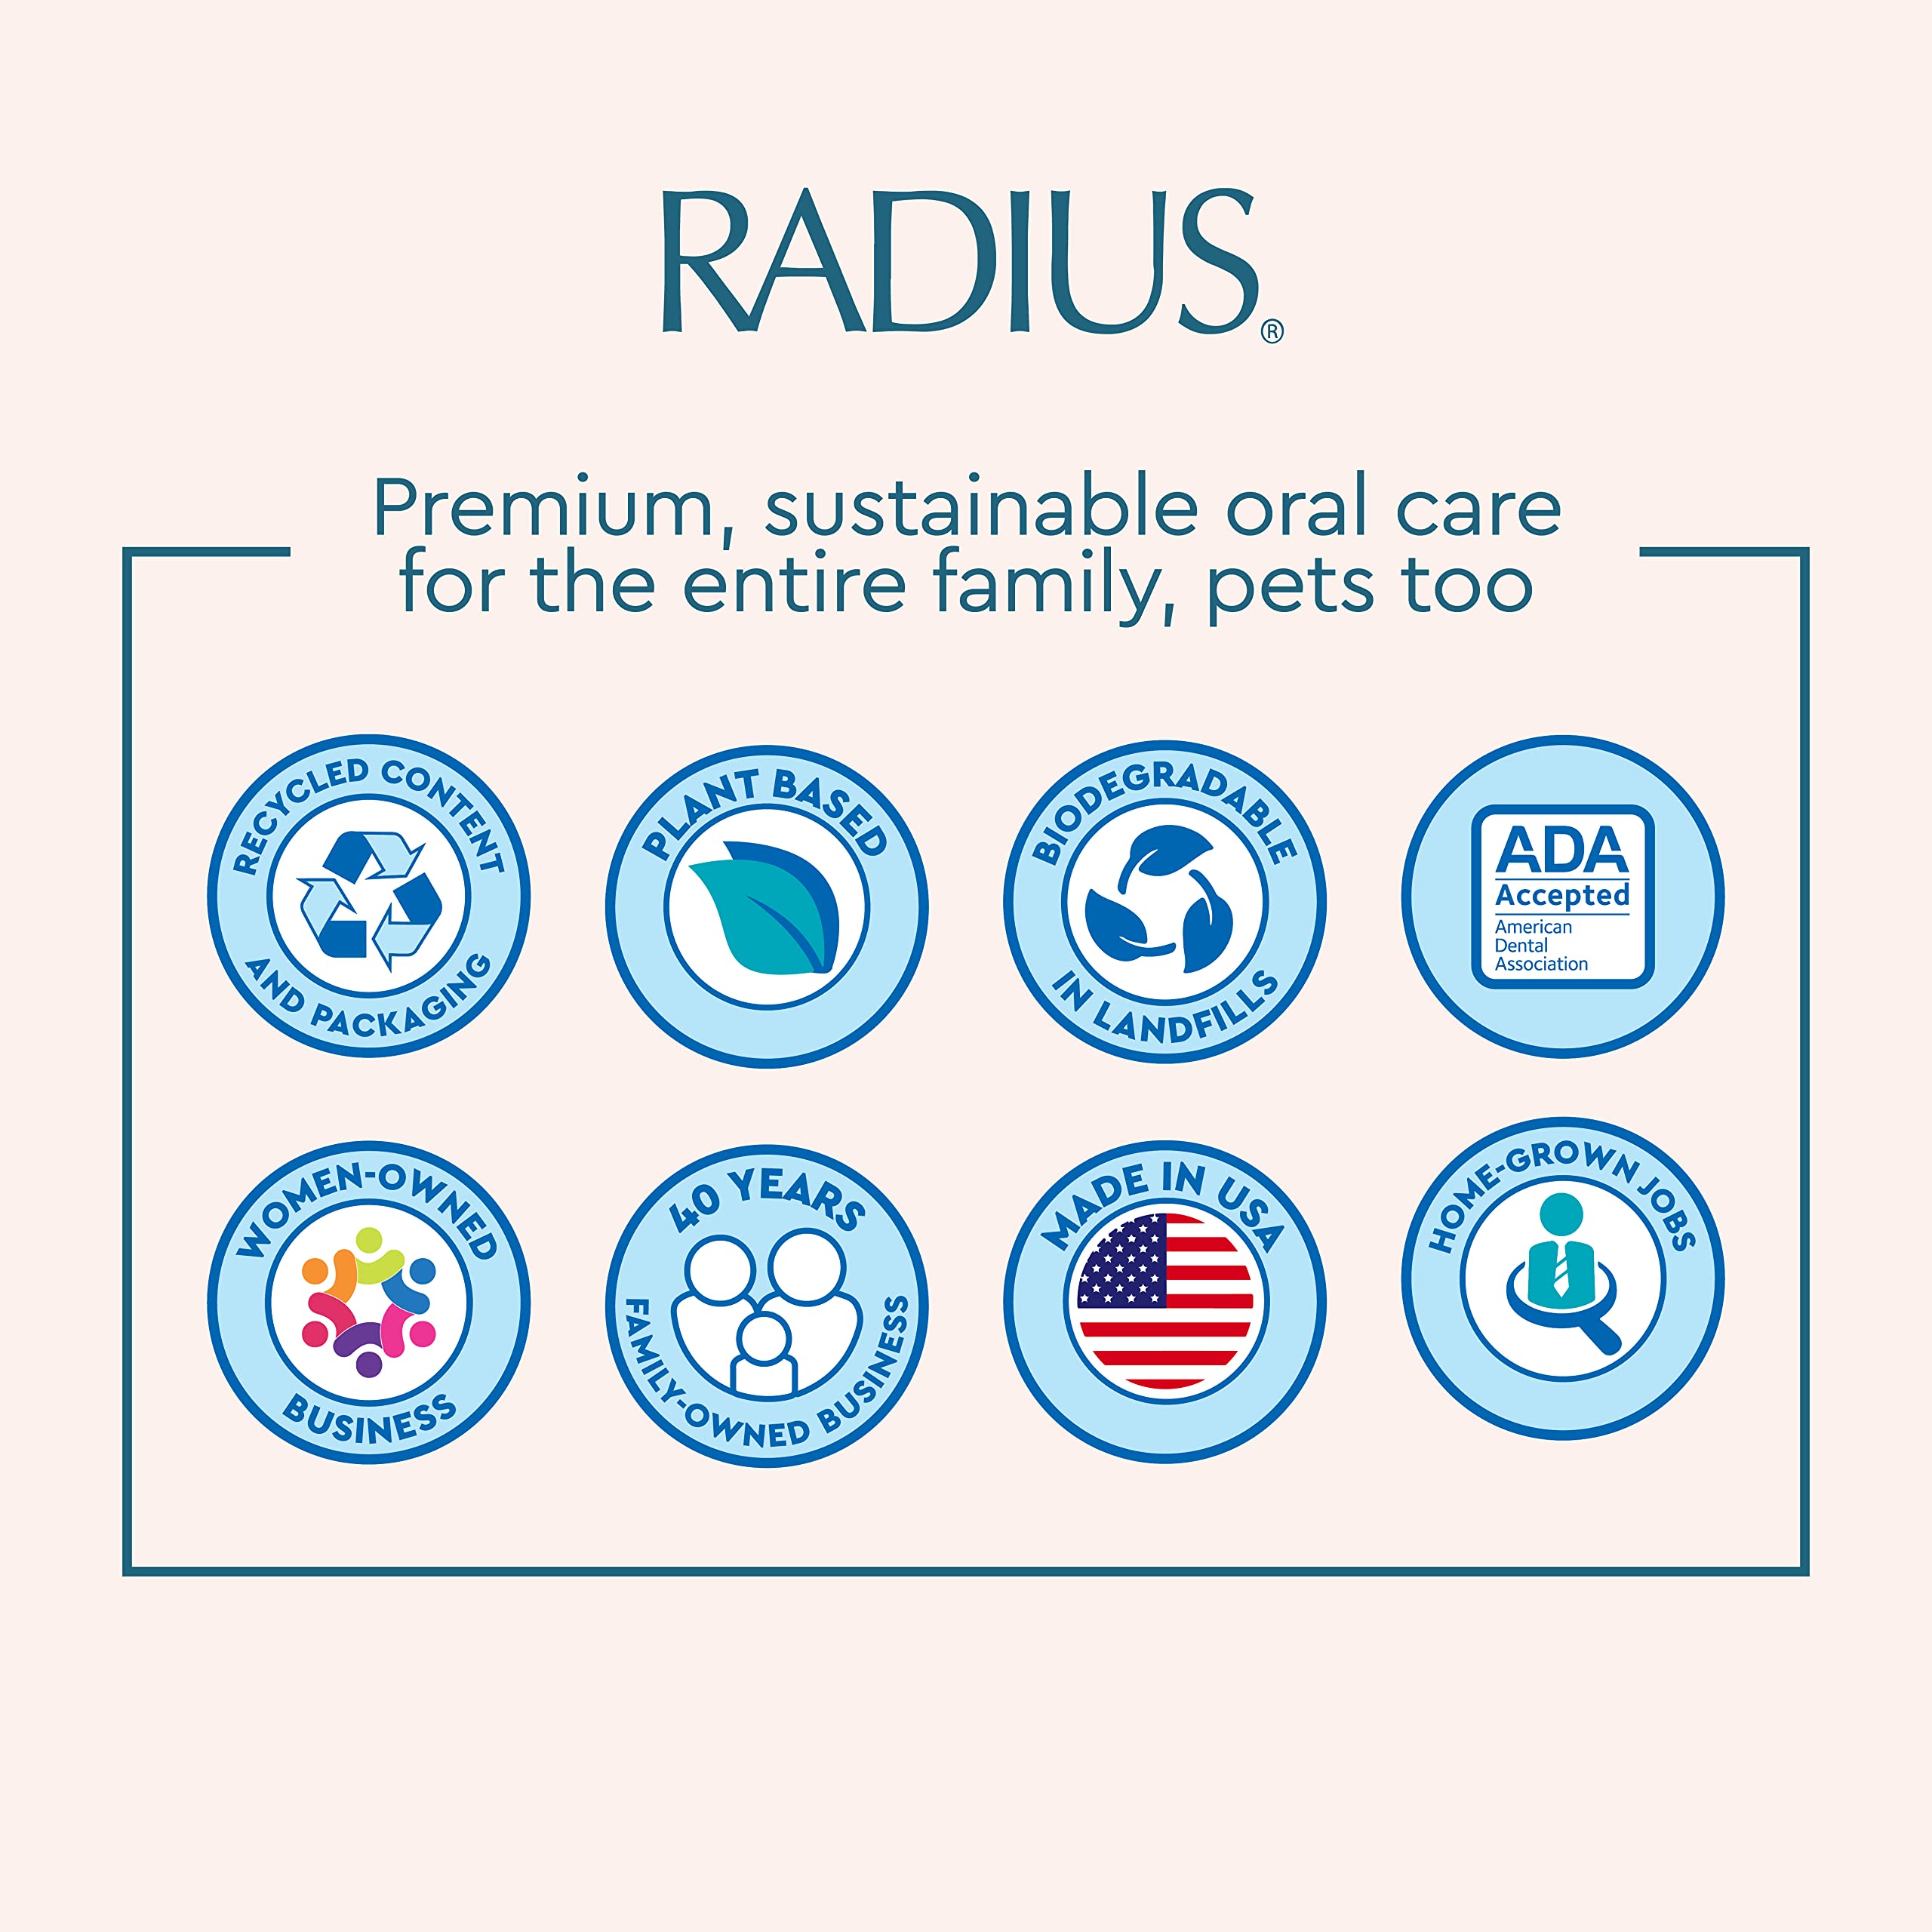 RADIUS Natural Unscented Silk Dental Floss 33 Yards Compostable Non-Toxic Oral Care & Designed to Help Fight Plaque Clear - Pack of 6